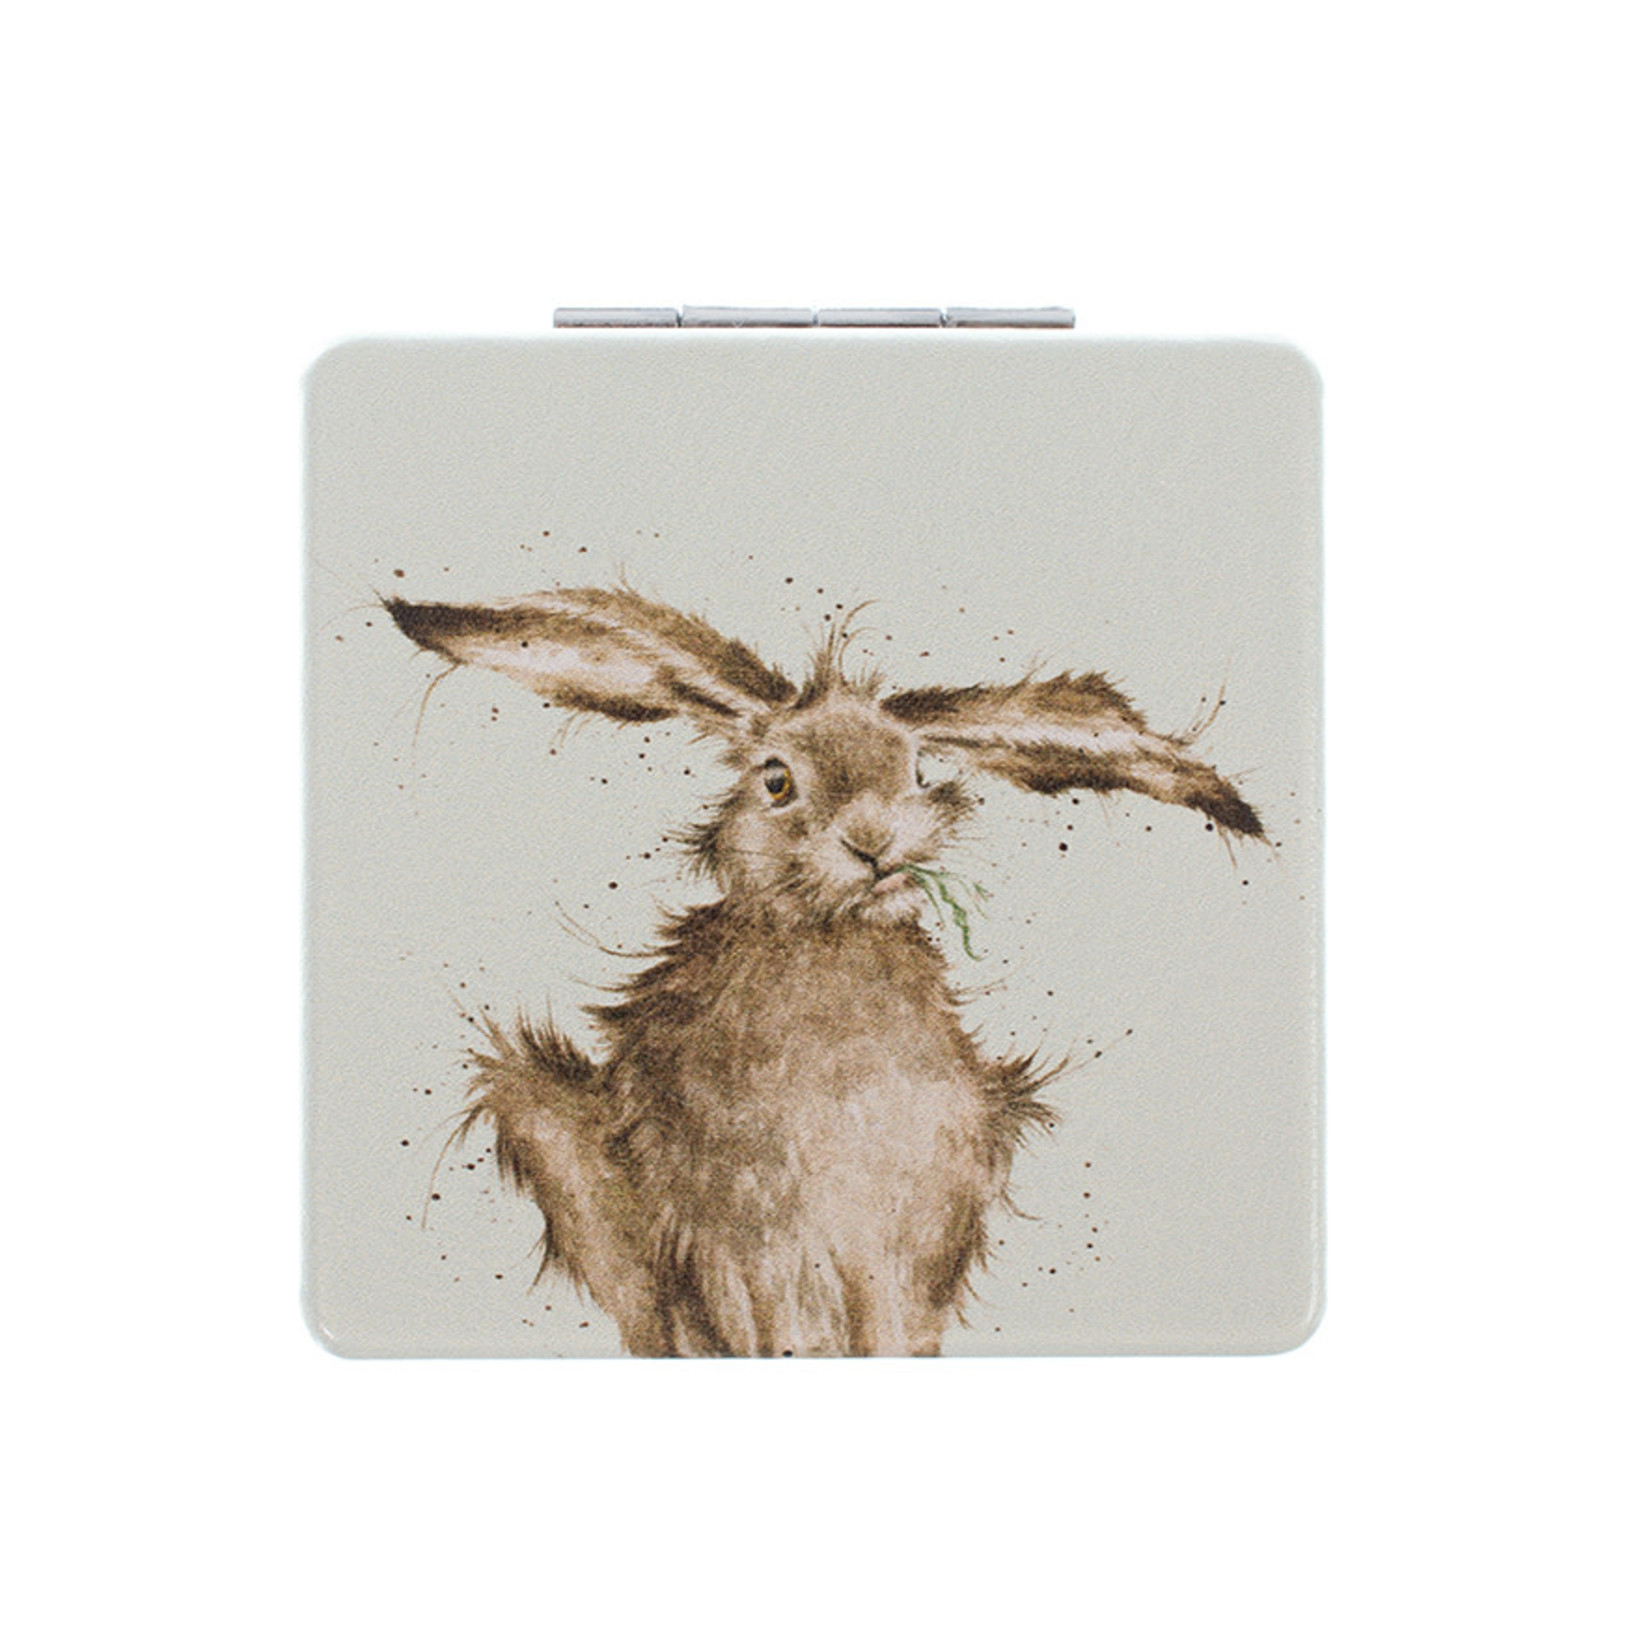 Wrendale Designs Compact Mirror - 'Hare-Brained' Hare (MR008)